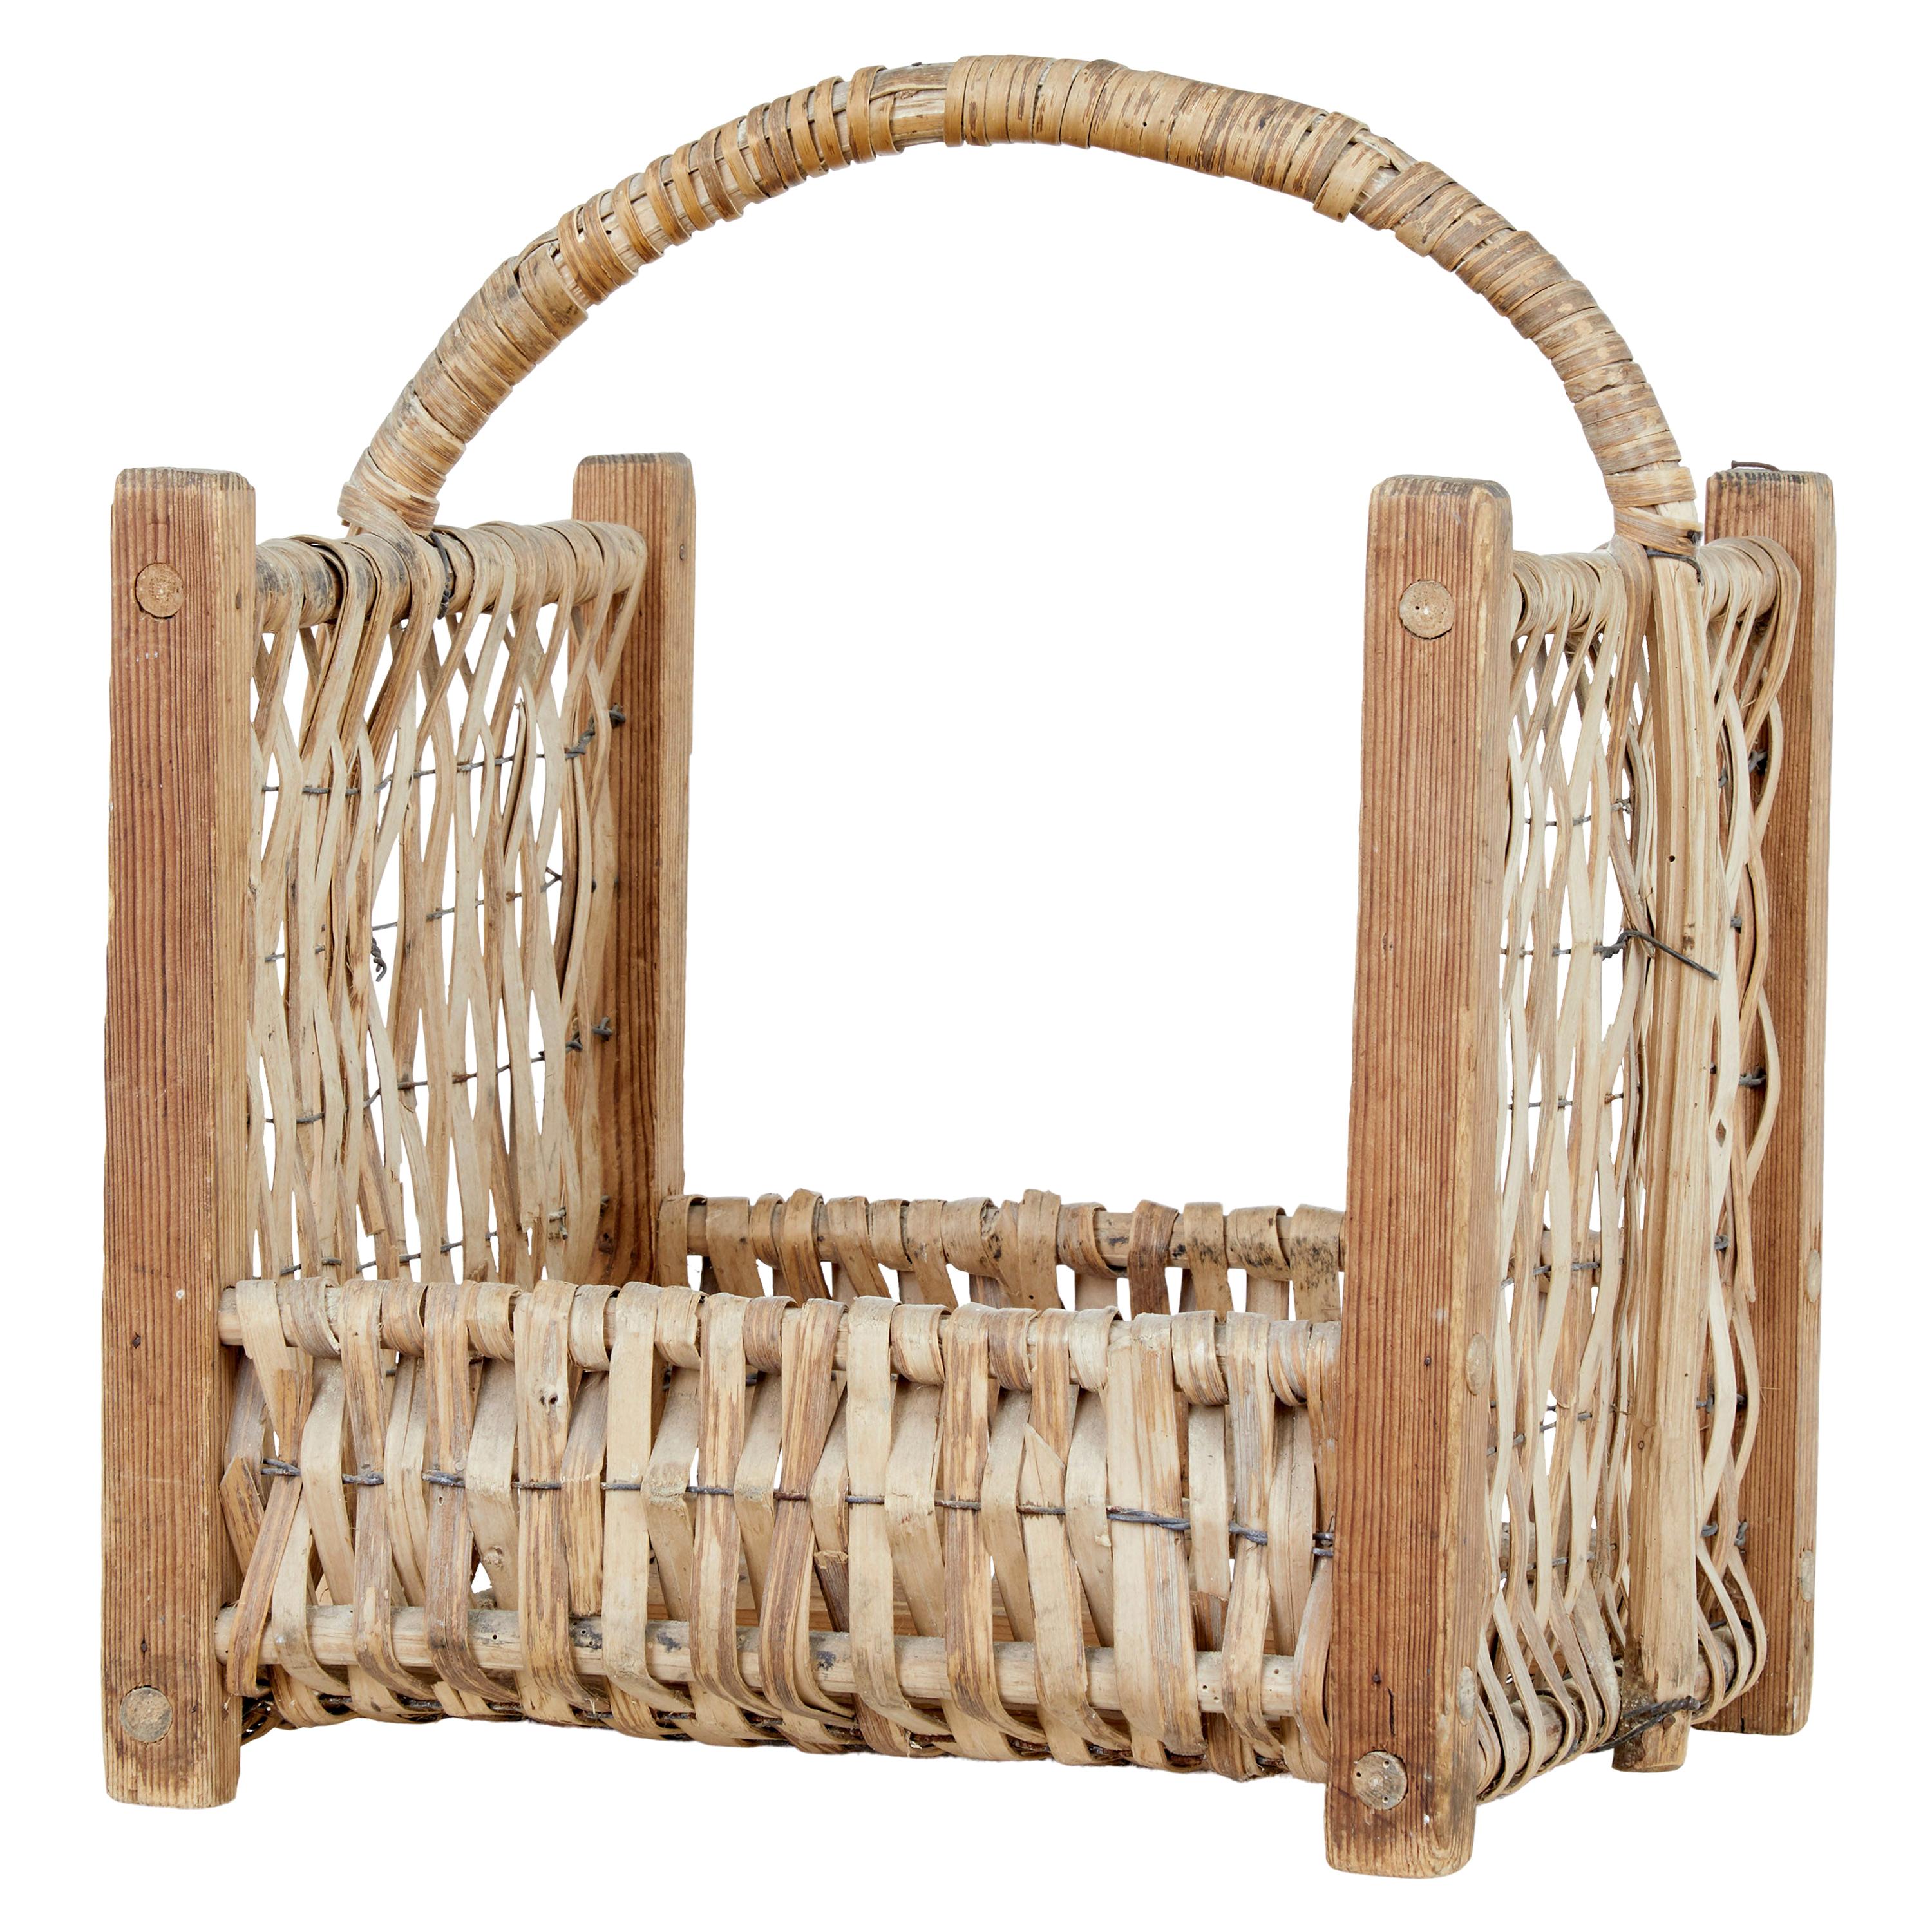 Late 19th Century Pine and Wicker Log Basket